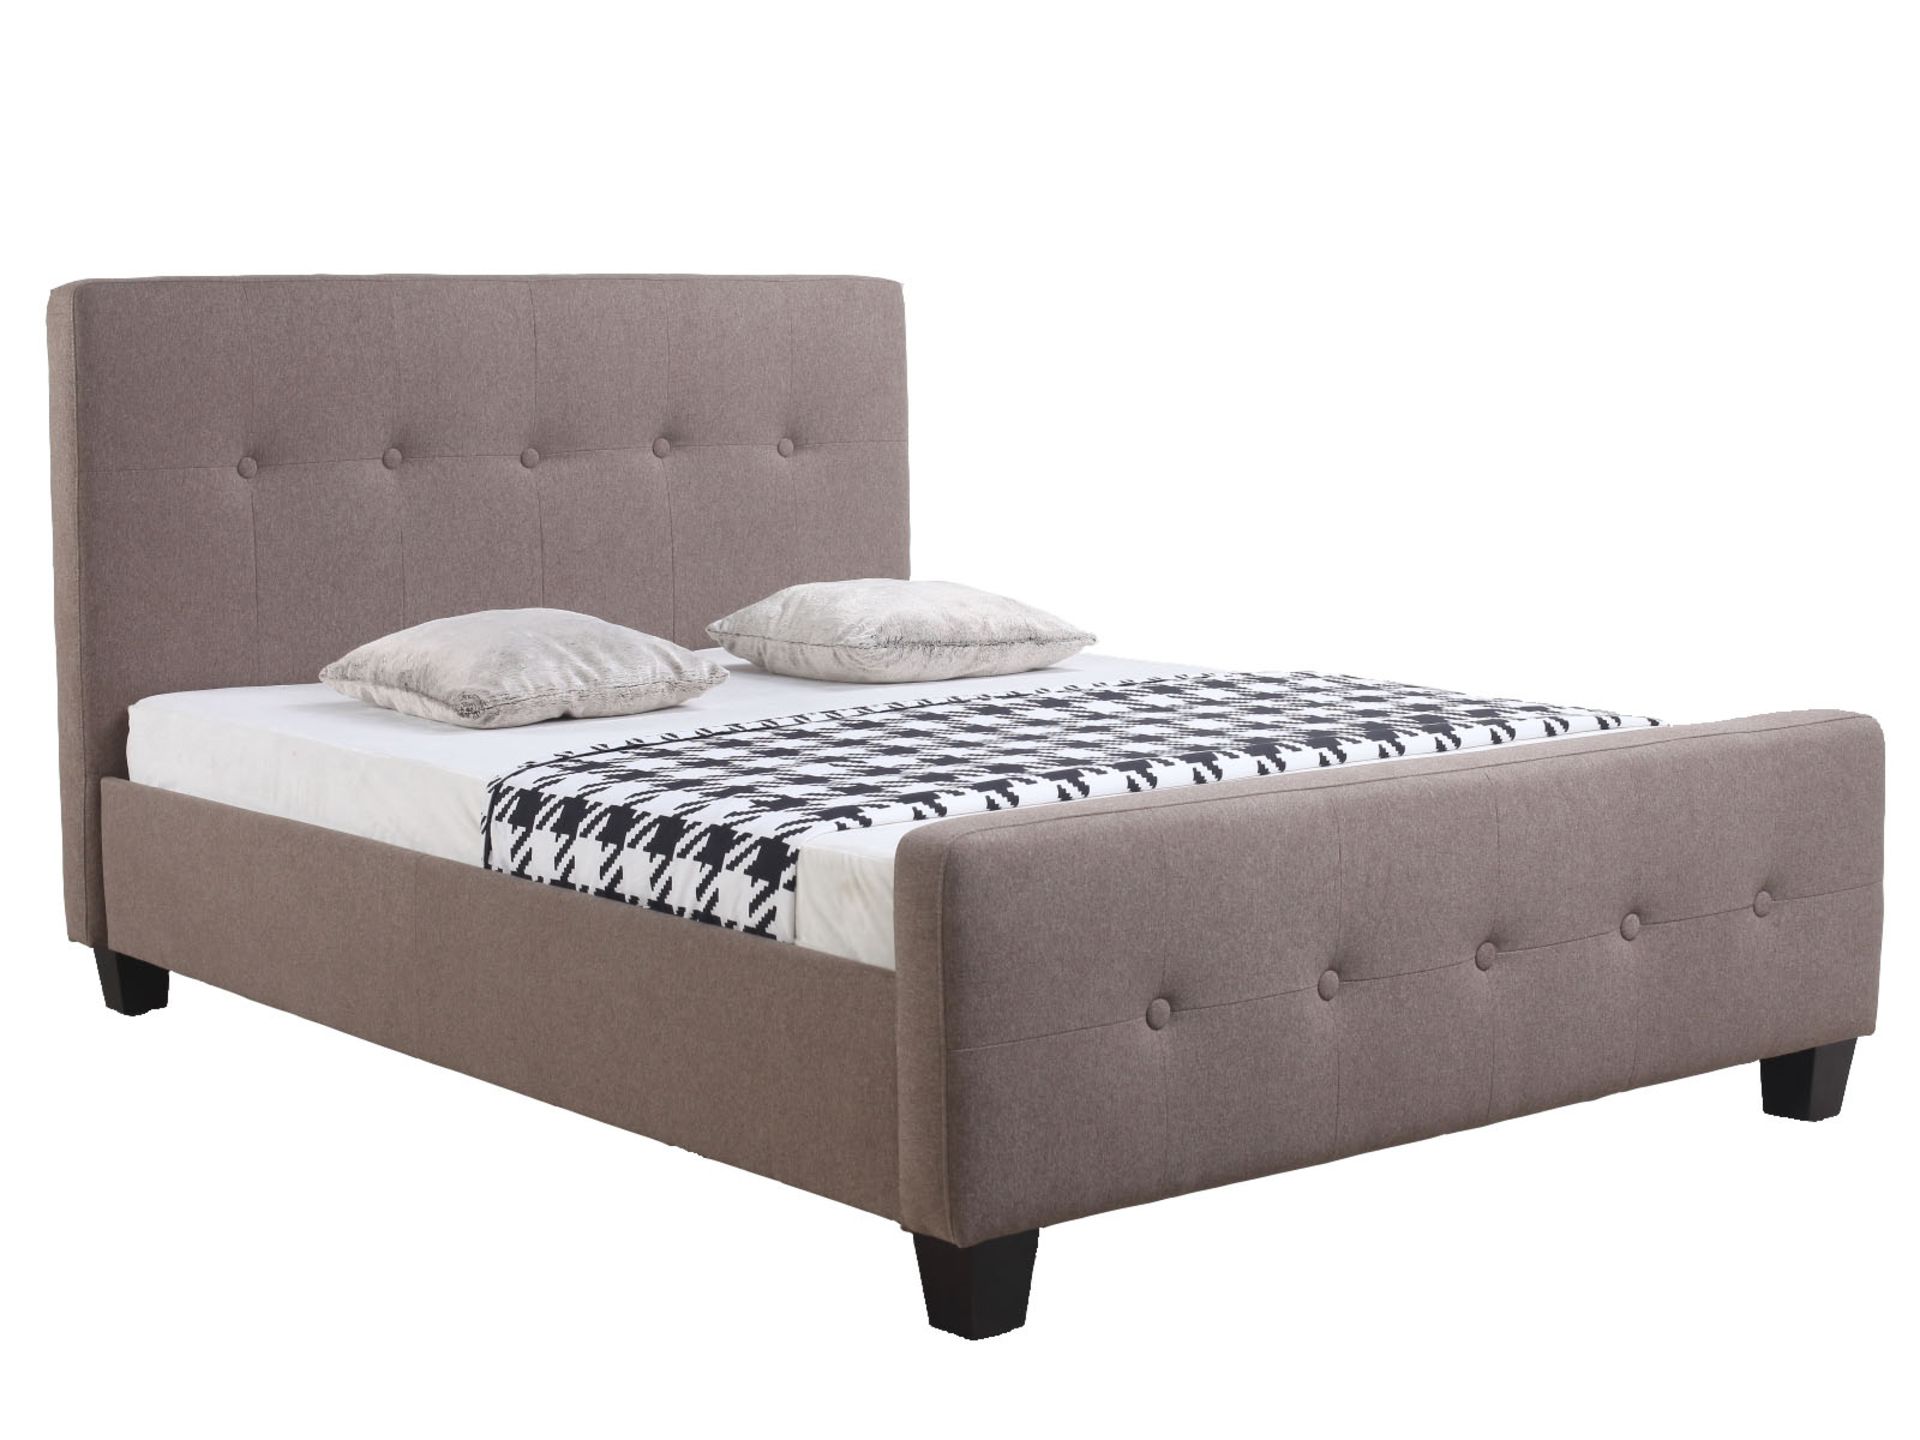 Brand new direct from the manufacturers king size Roxane bedstead in taupe